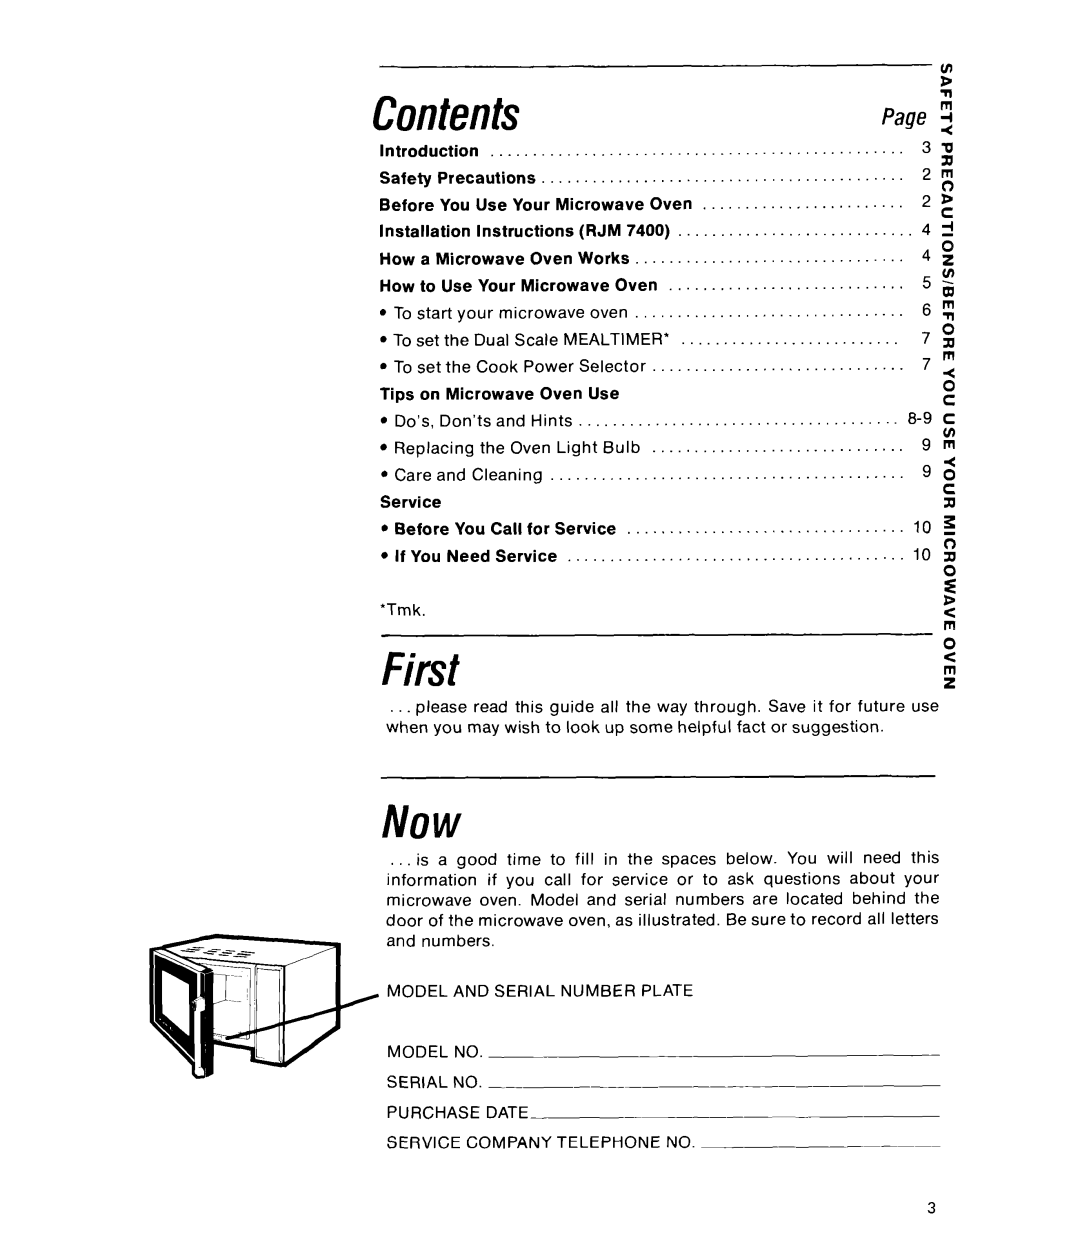 Whirlpool RJM 2840, RJM 7400 manual Contents, First, Page 